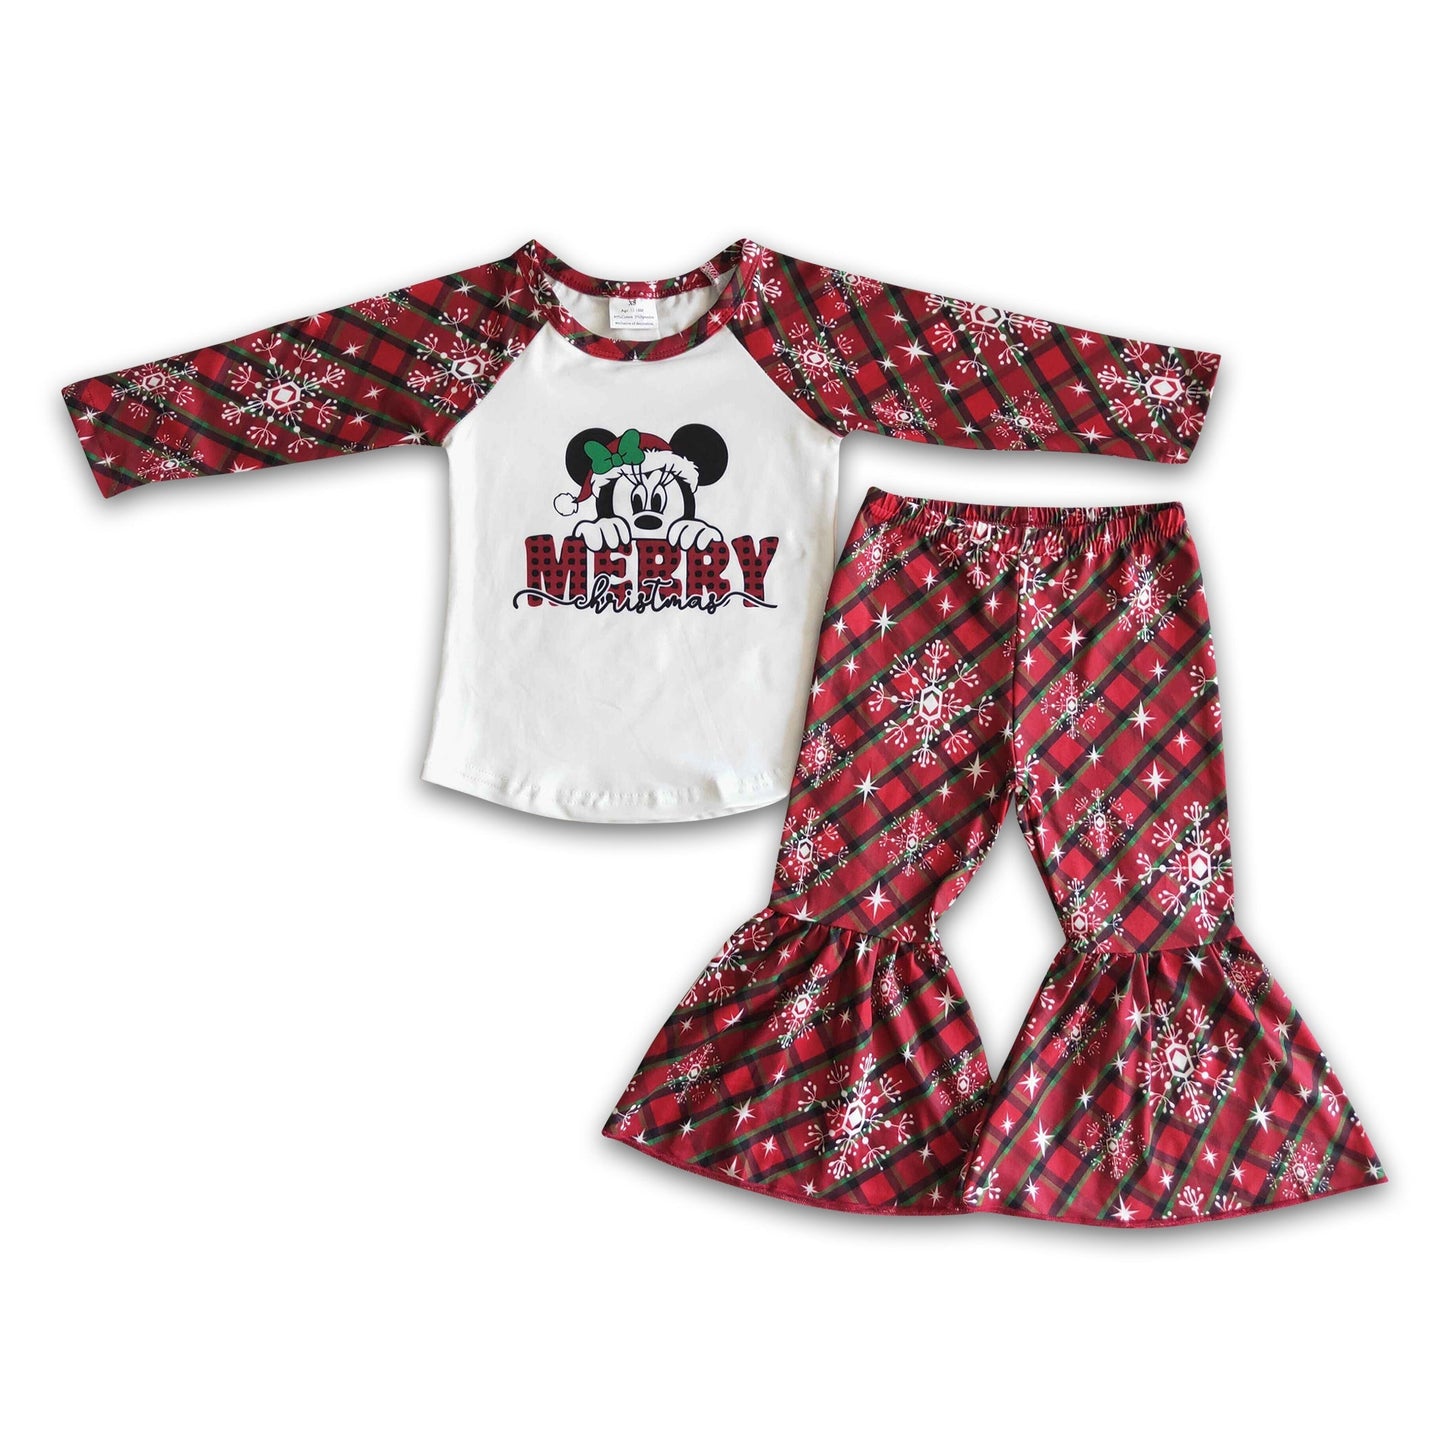 Merry Christmas mouse shirt plaid pants girls boutique outfits